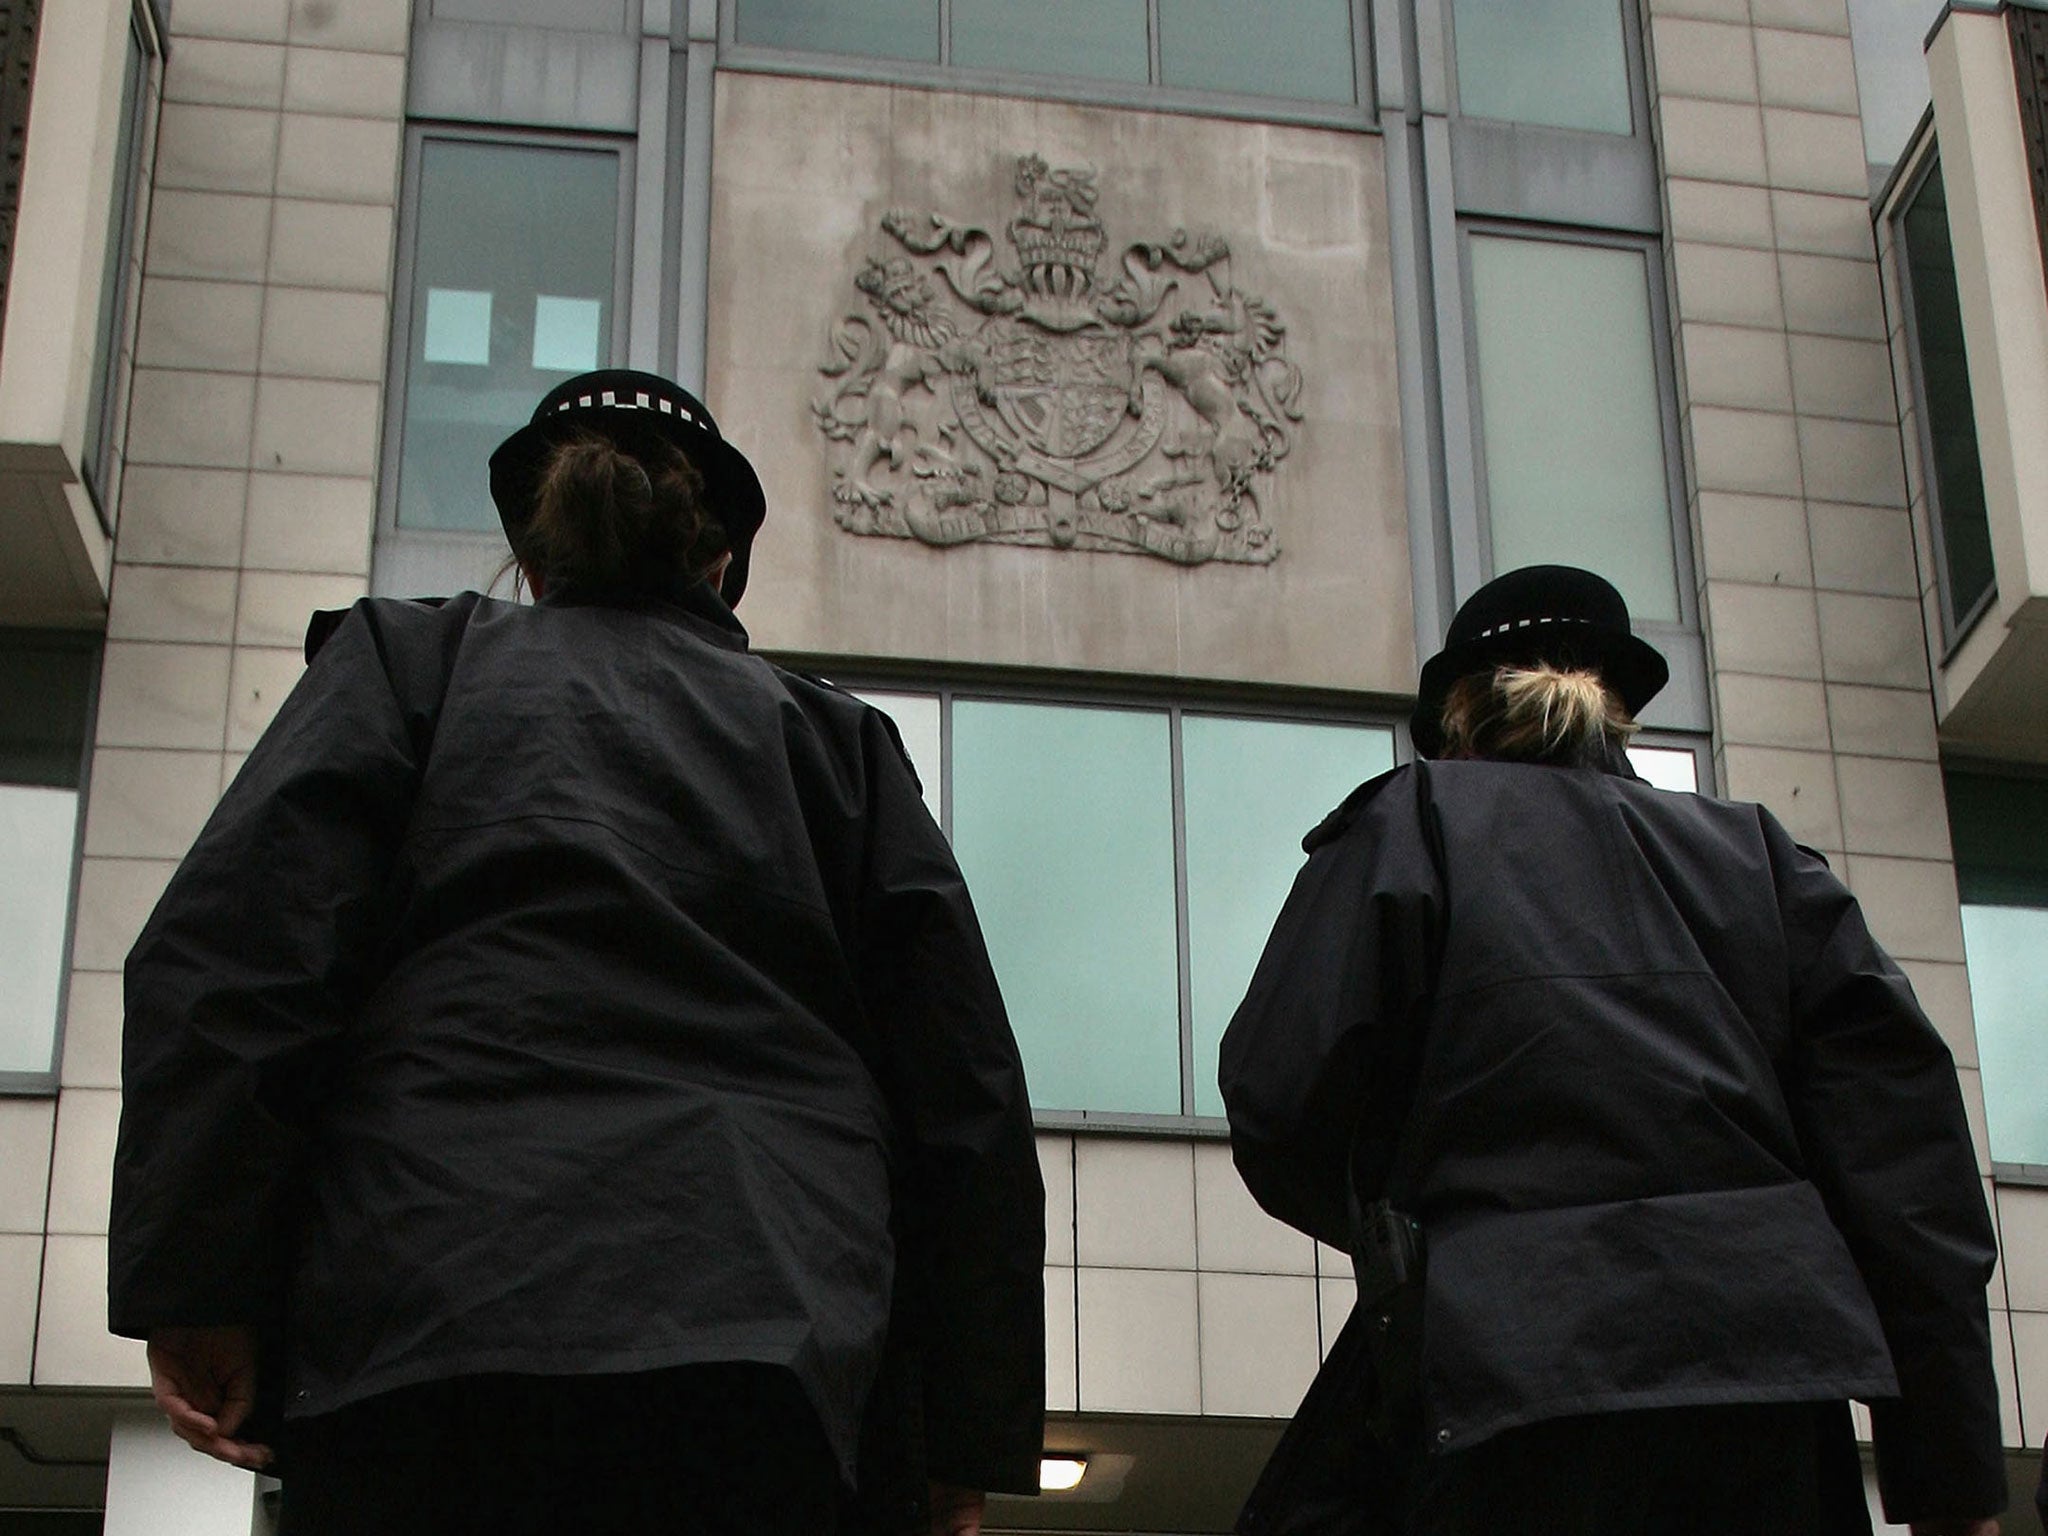 The boy will appear at Camberwell Magistrates' Court on Sunday